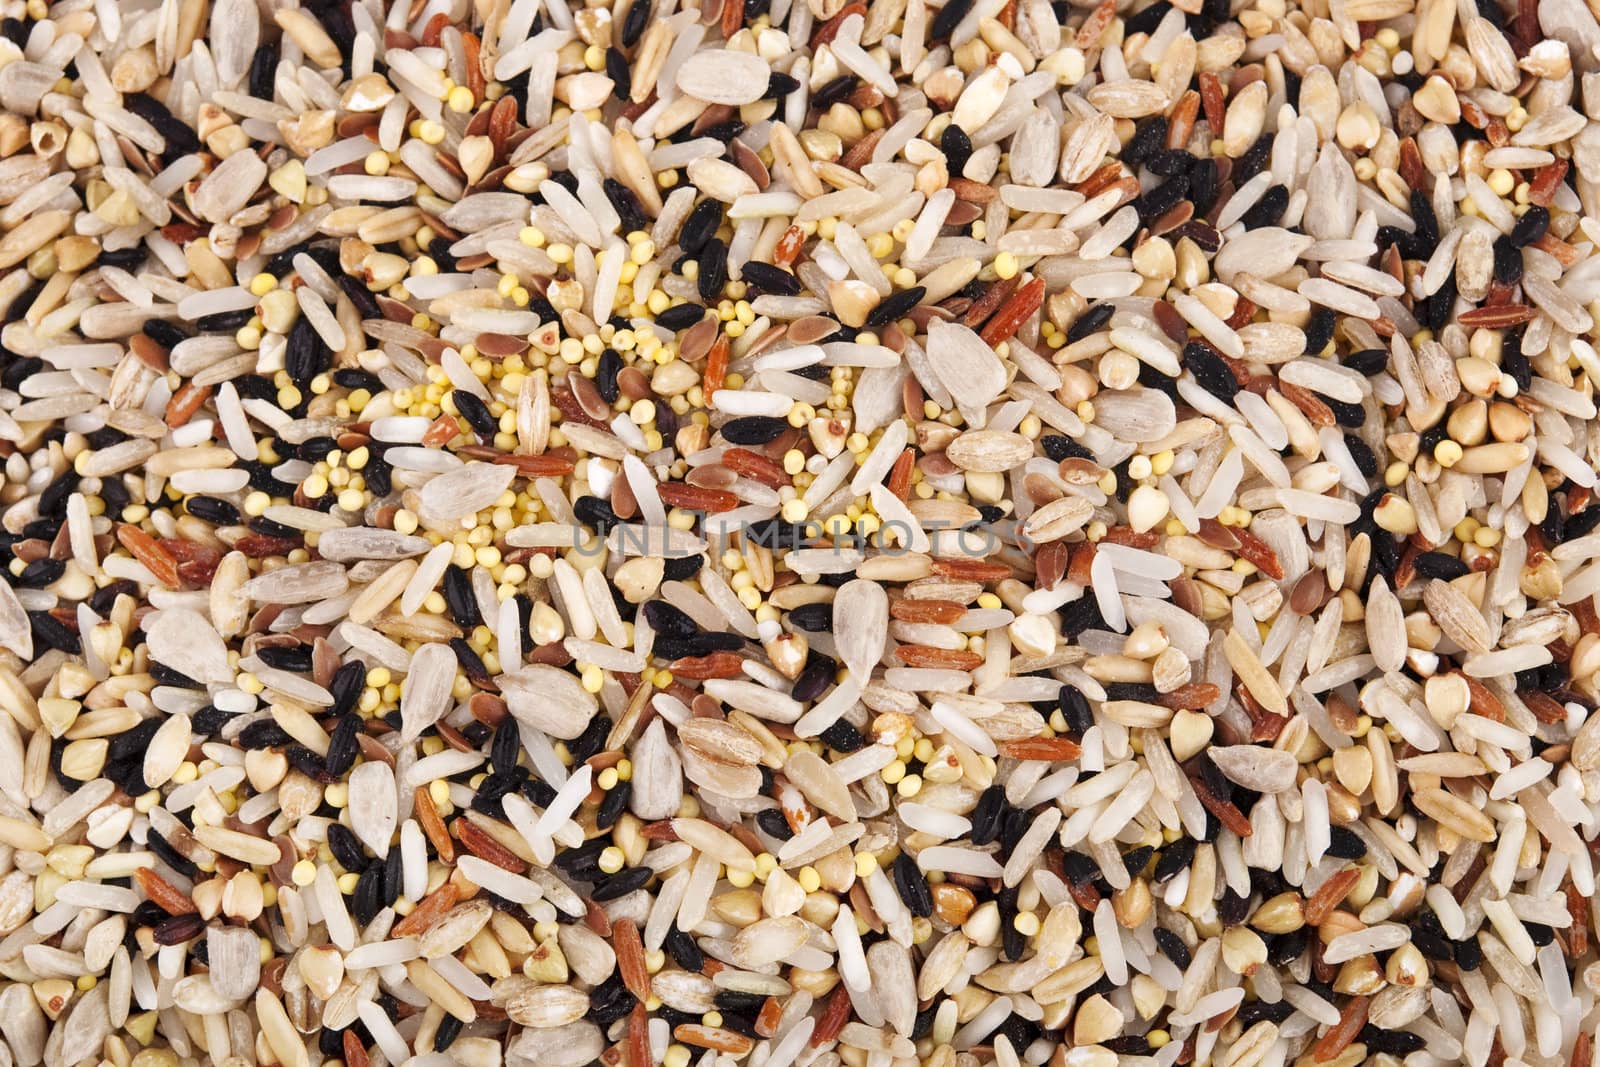 Raw grains background, mixed with 12 different grains